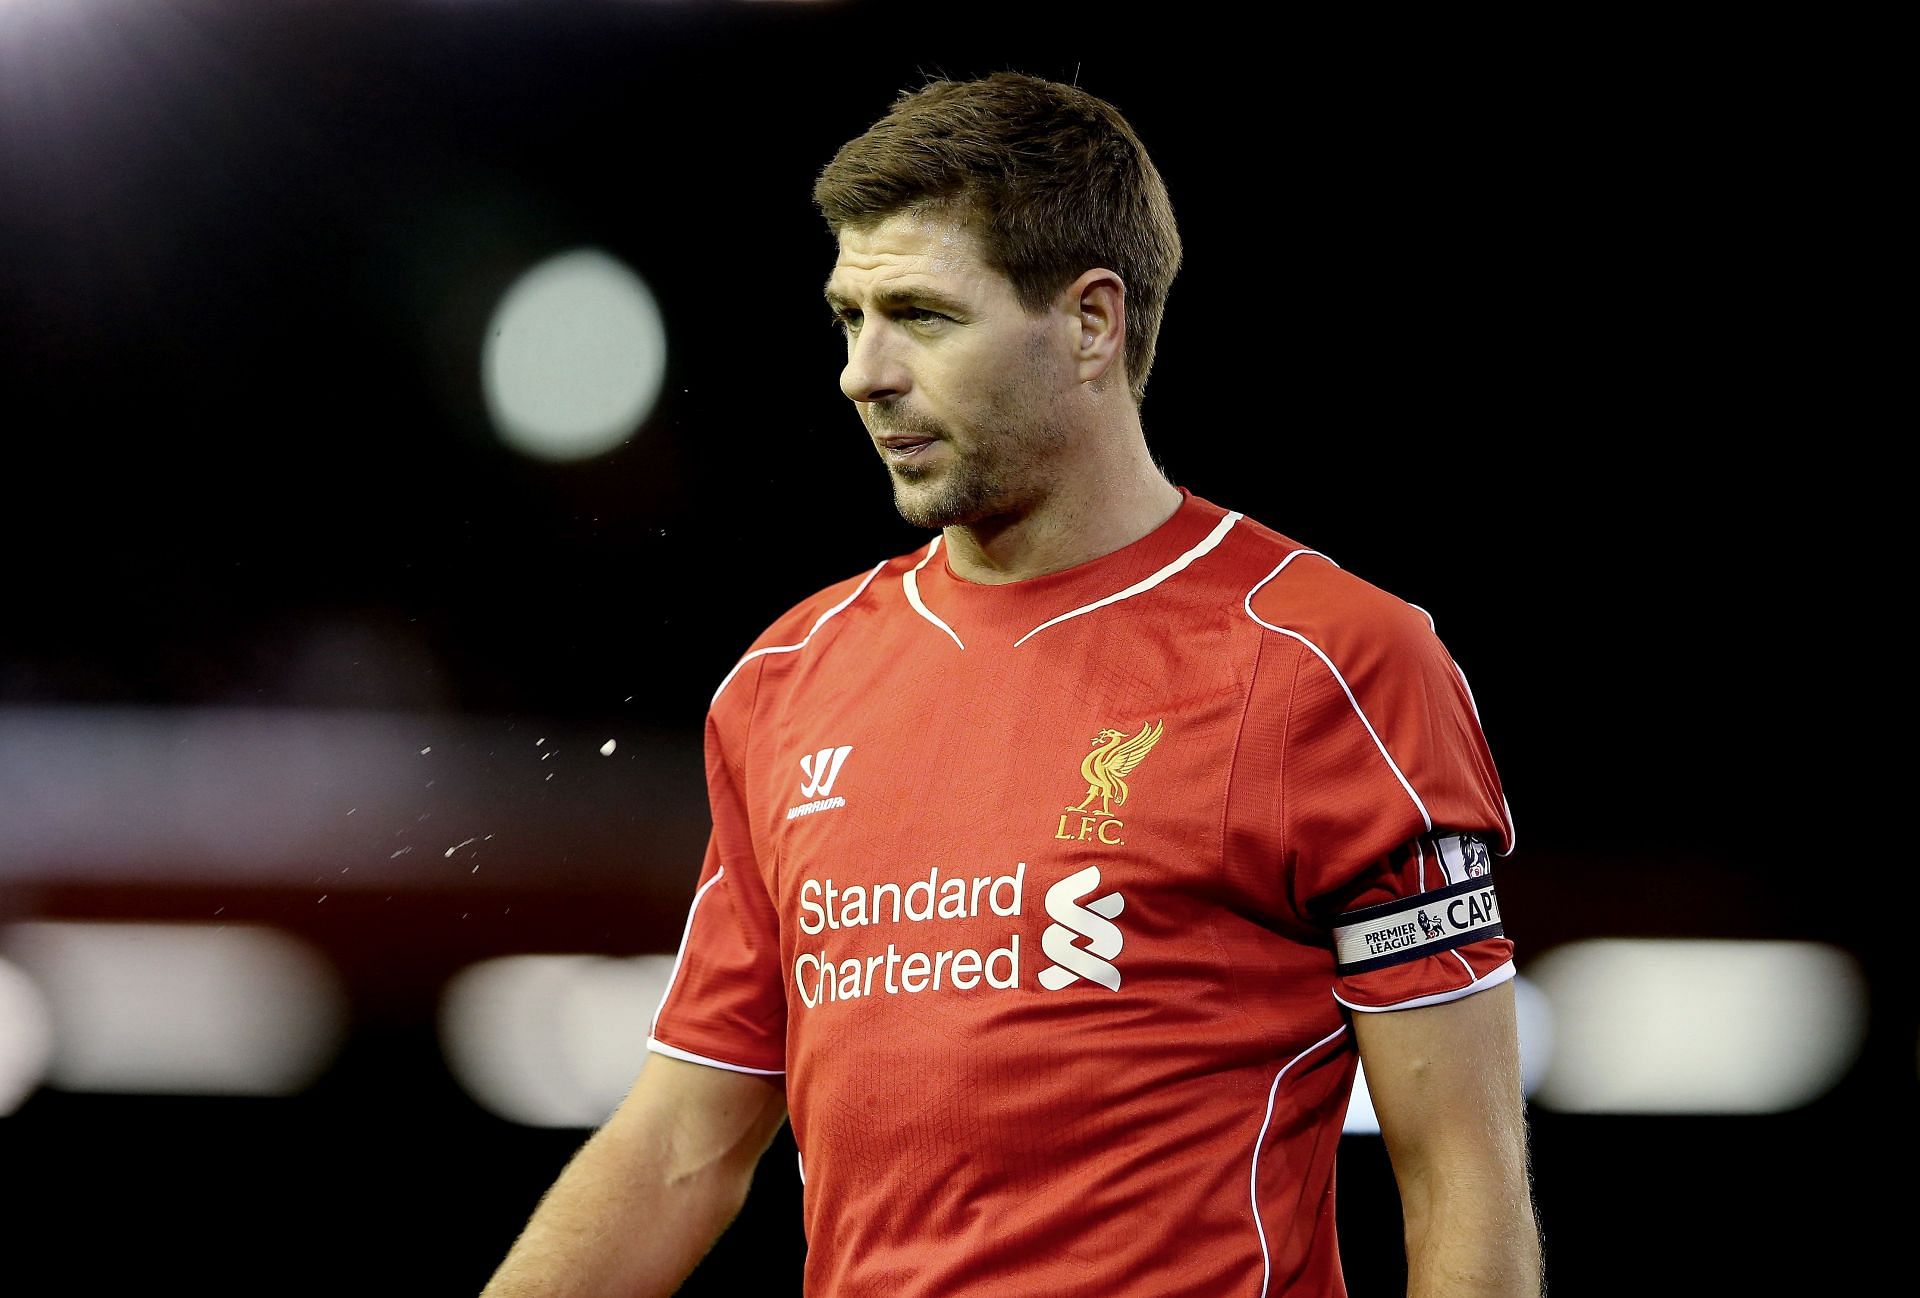 Steven Gerrard captained Liverpool with distinction.